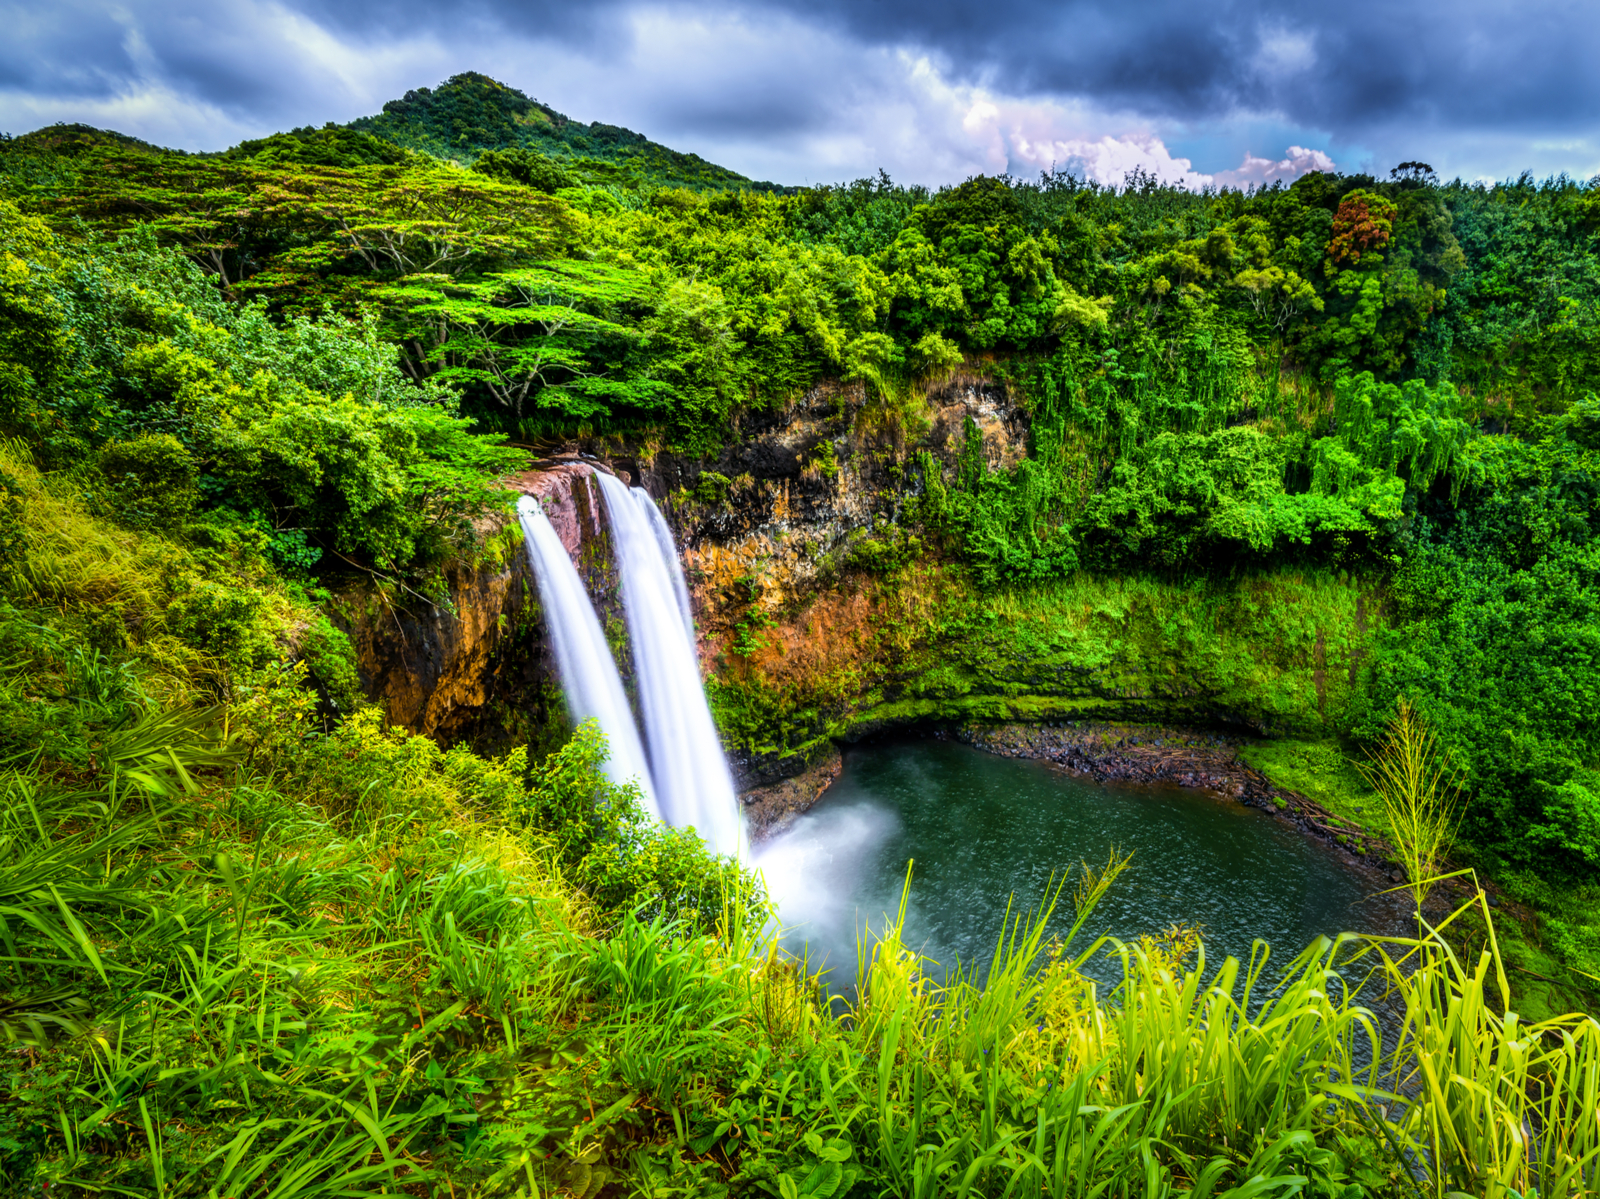 Wailua Falls during the best time to visit Kauai, in the early summer